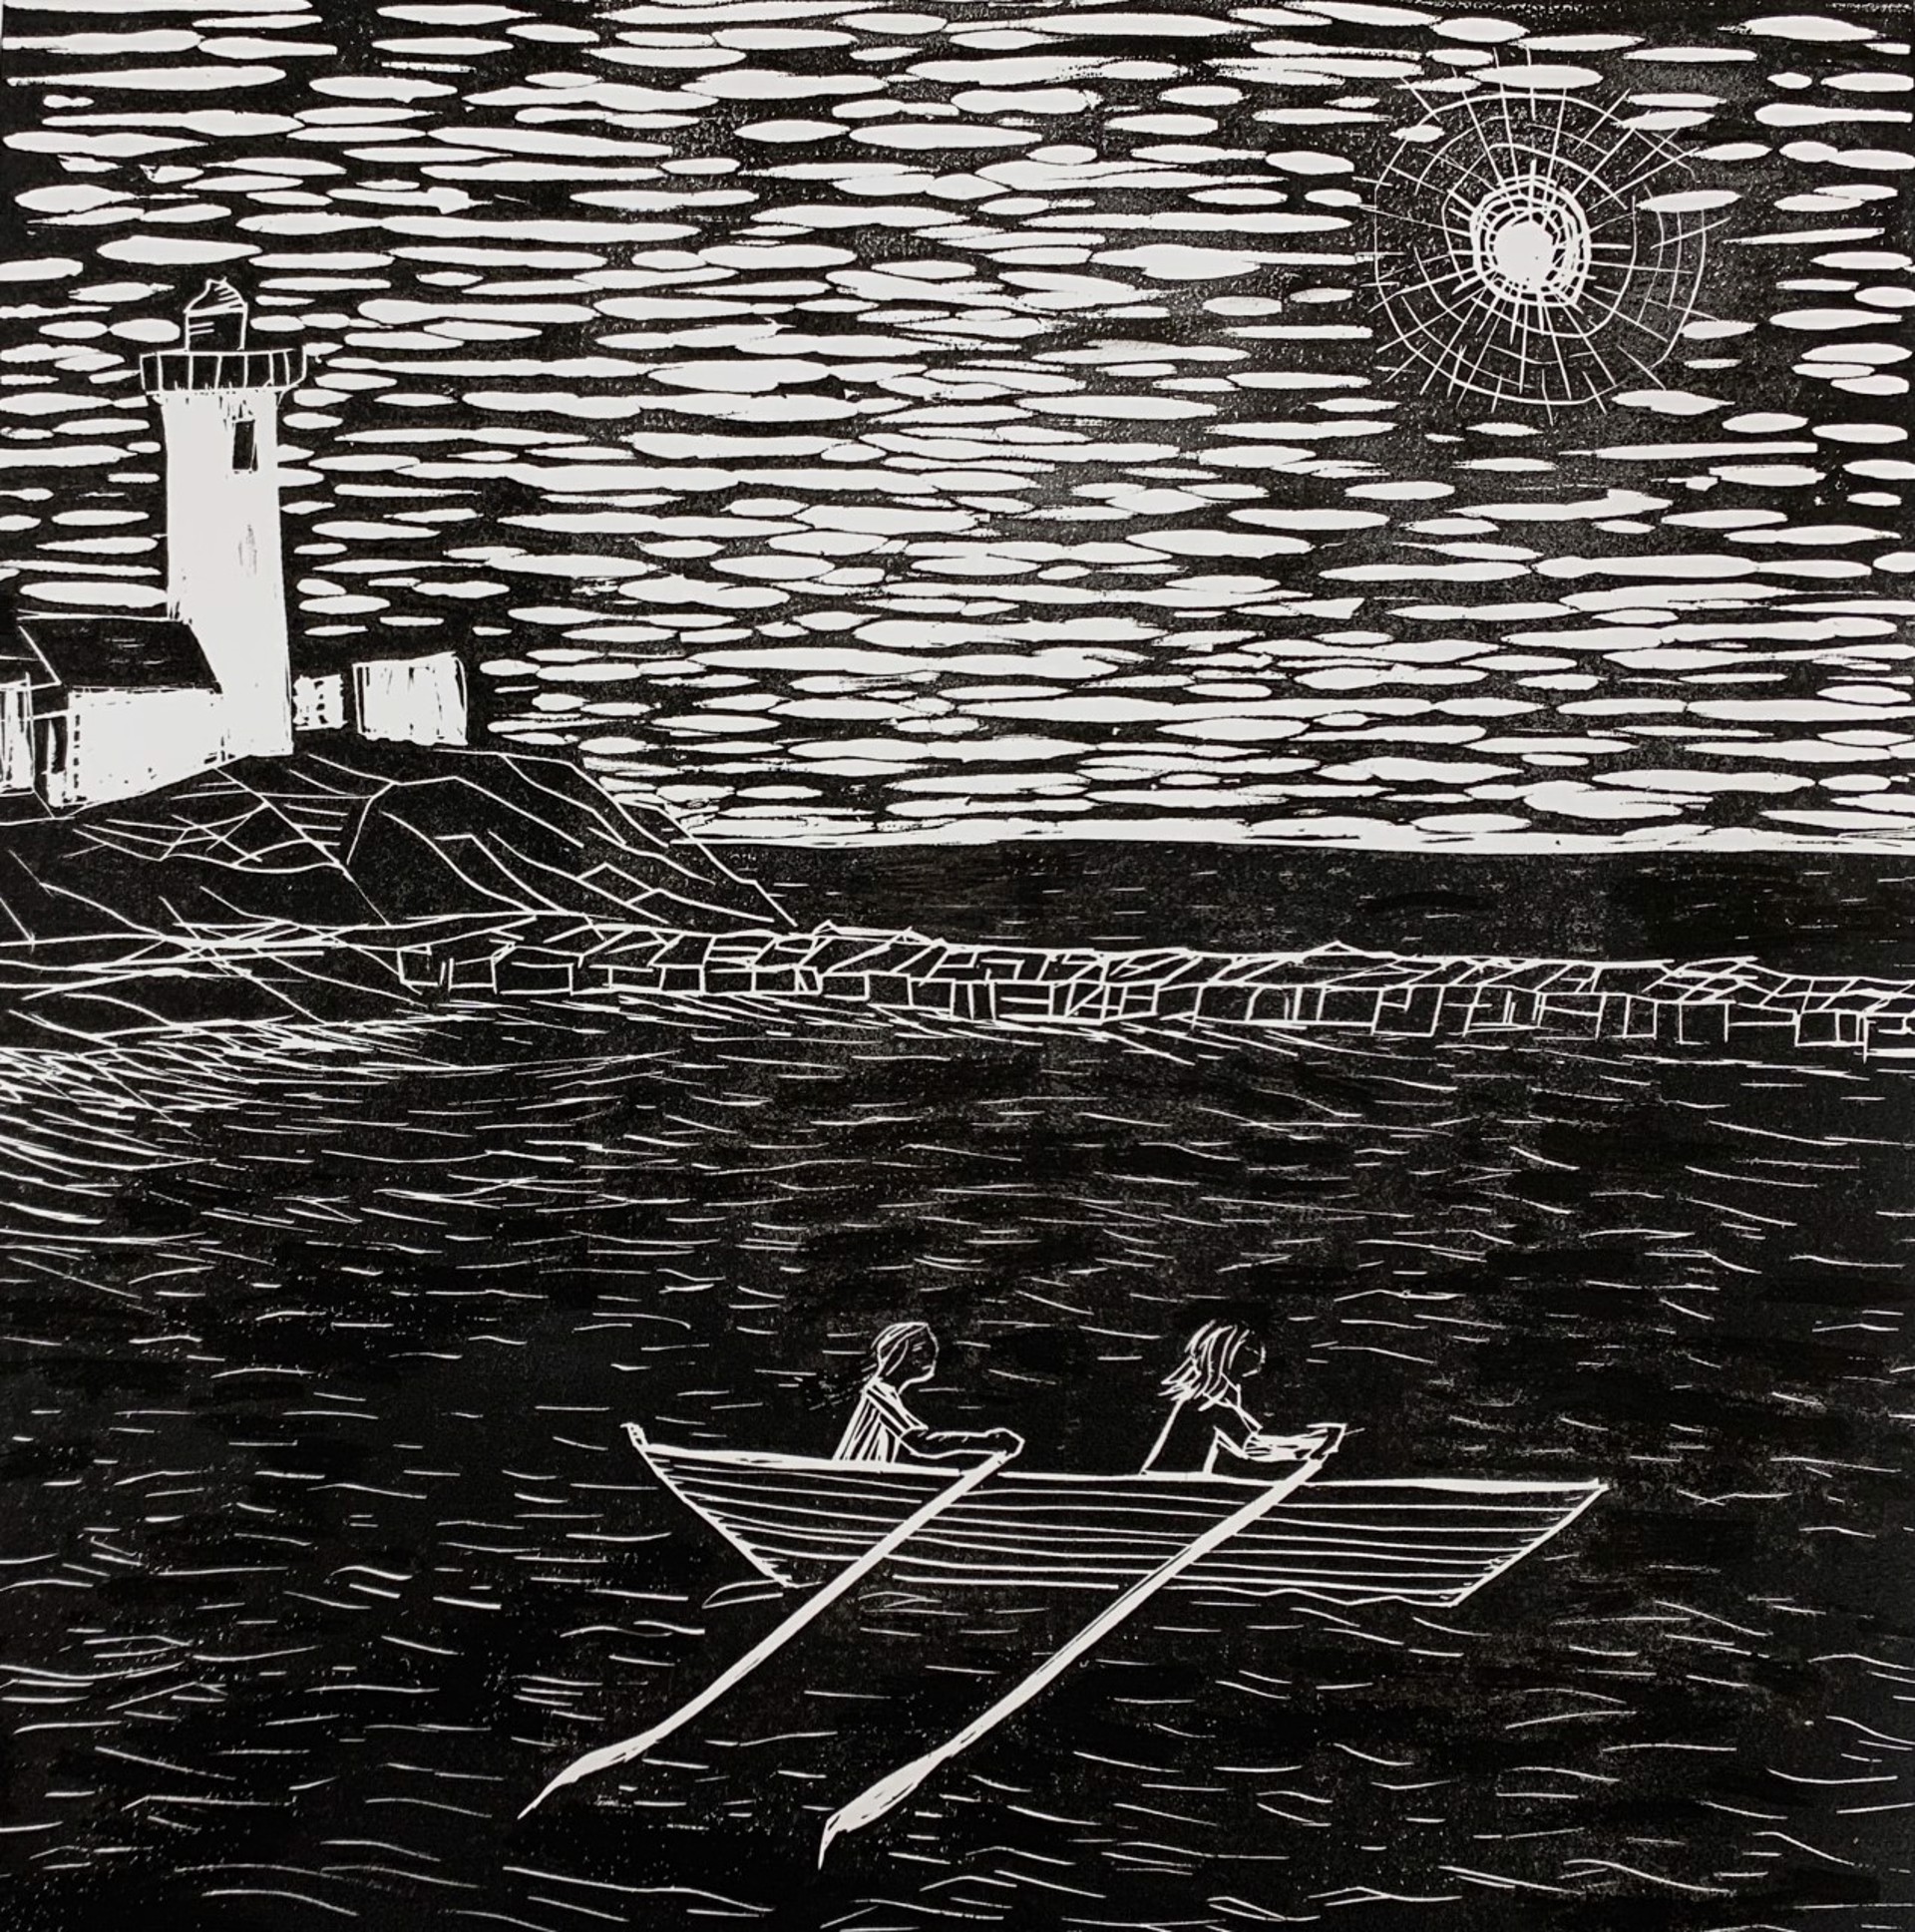 Rowing in Calm Seas by Janice Carragher Charles